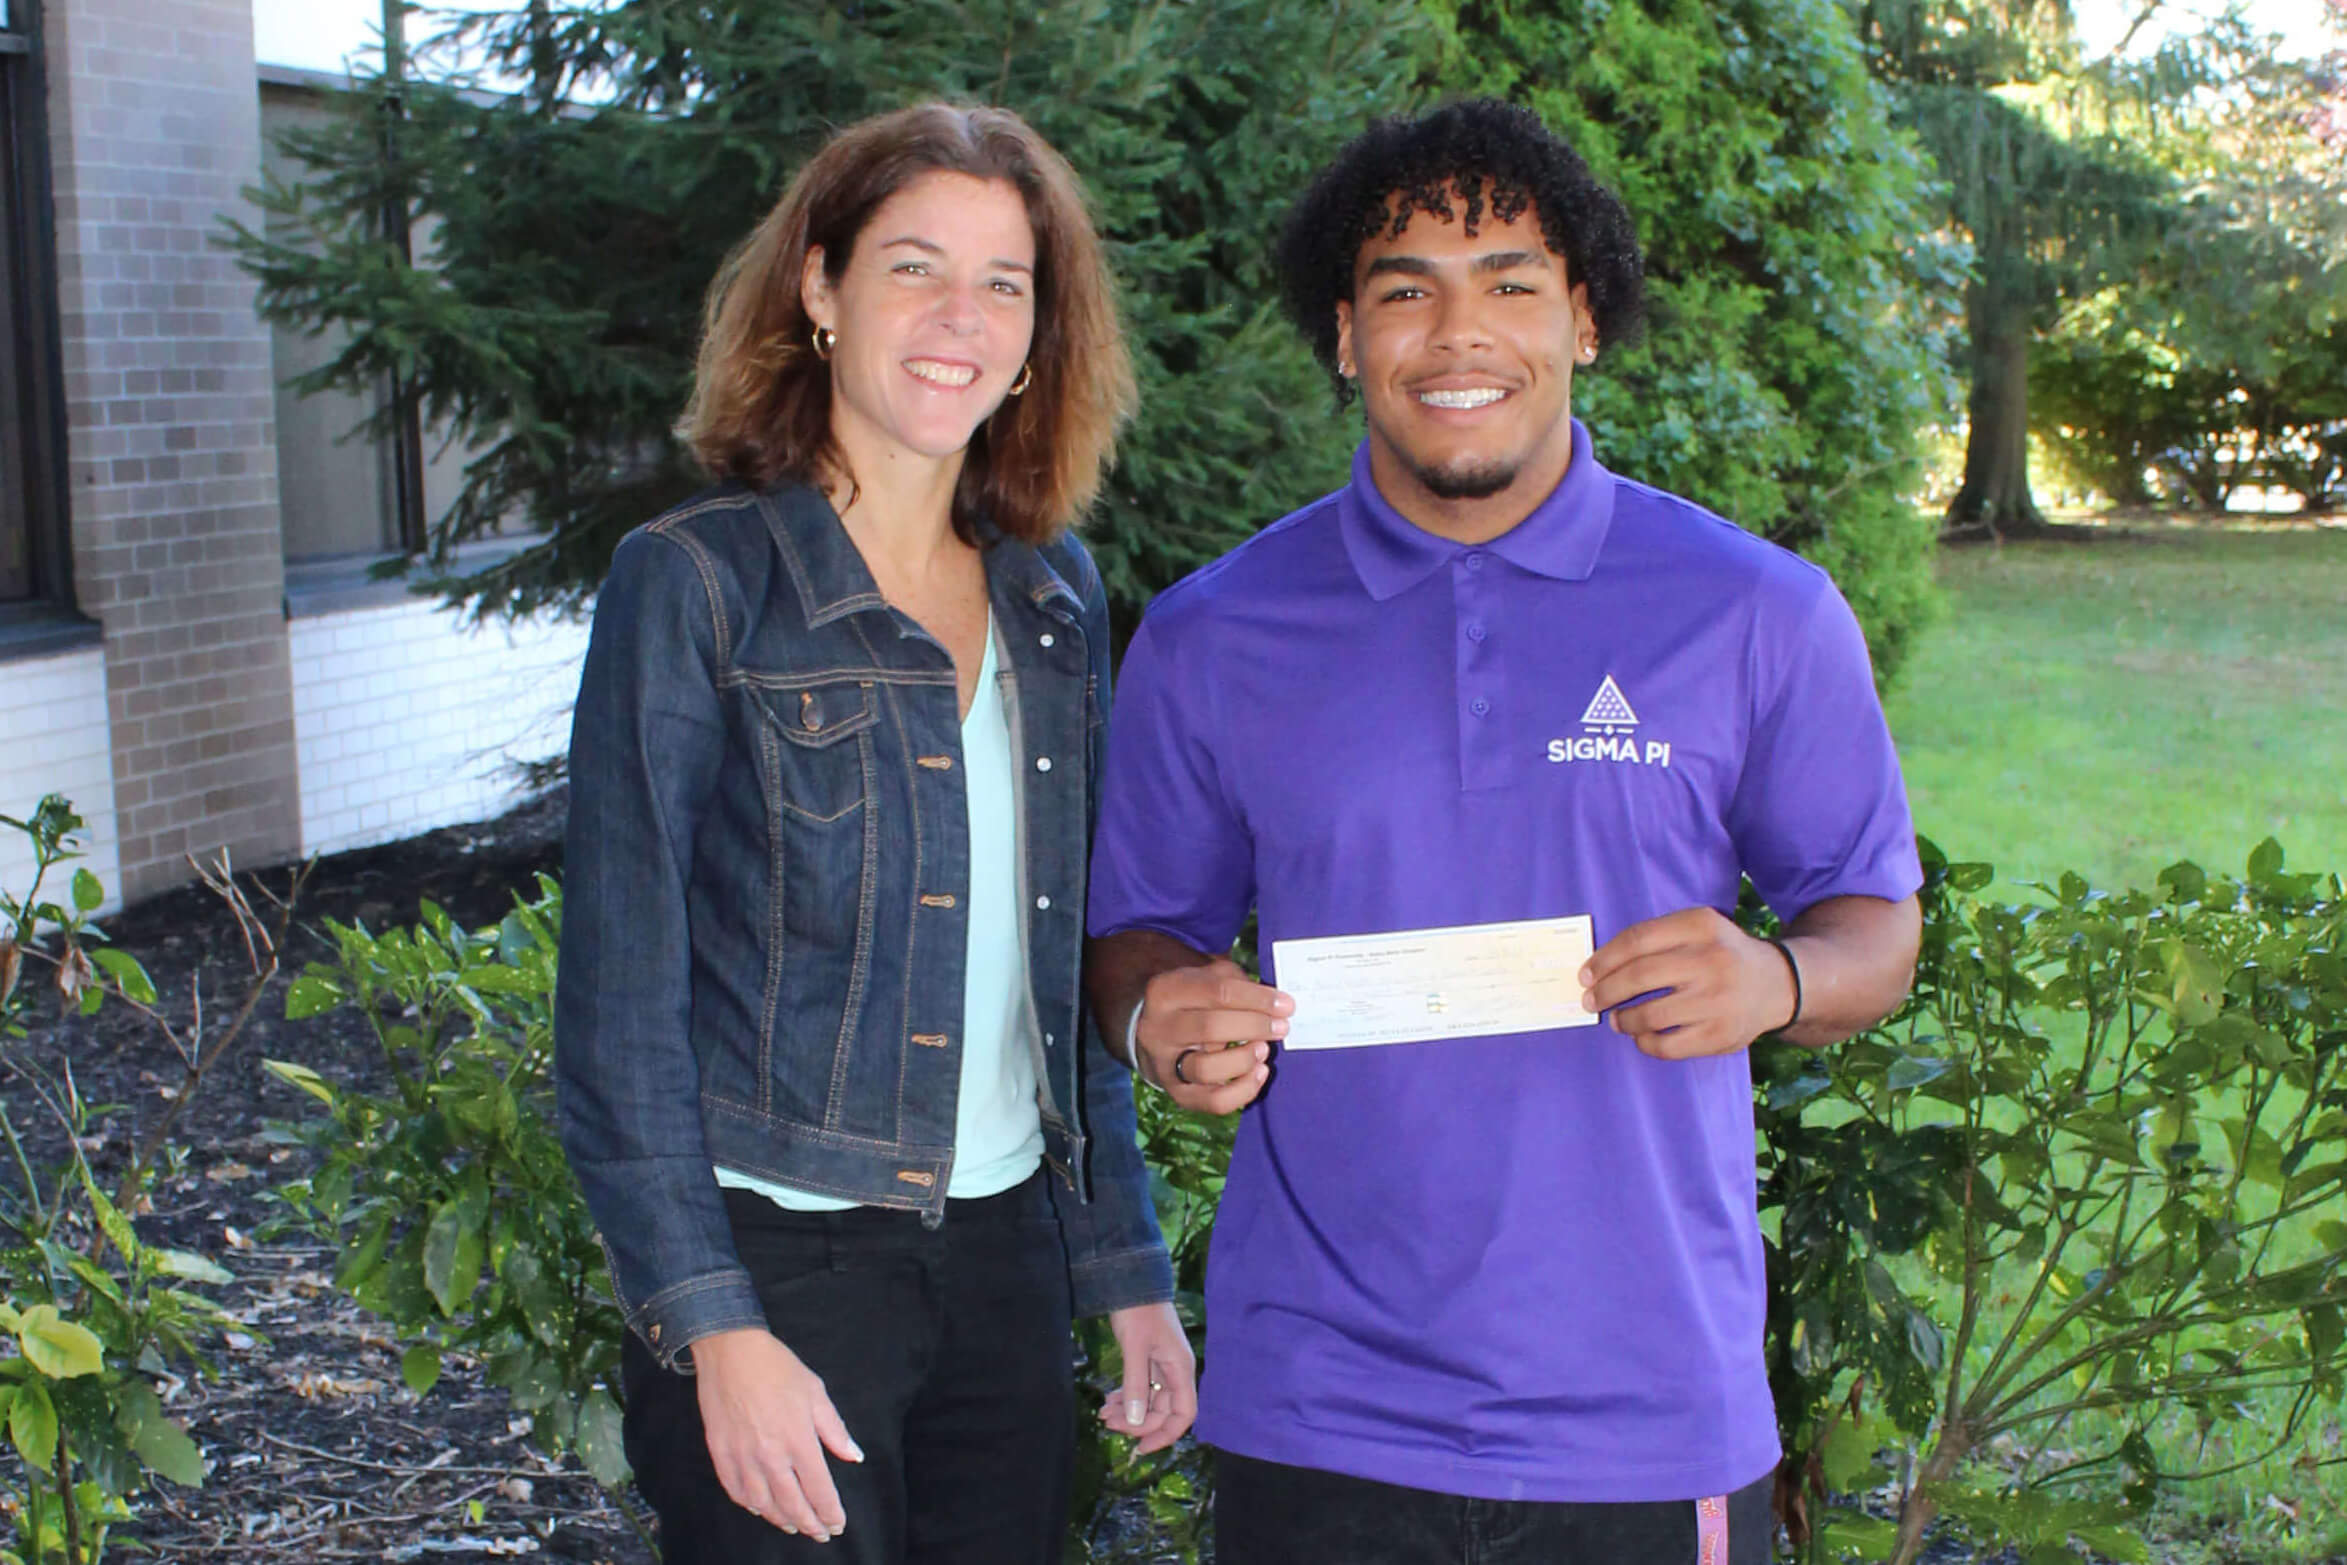 Senior marketing student Isyhne Woodard presents a check to Jeanne Navagh from the Mental Health Association of Monmouth County (MHA).